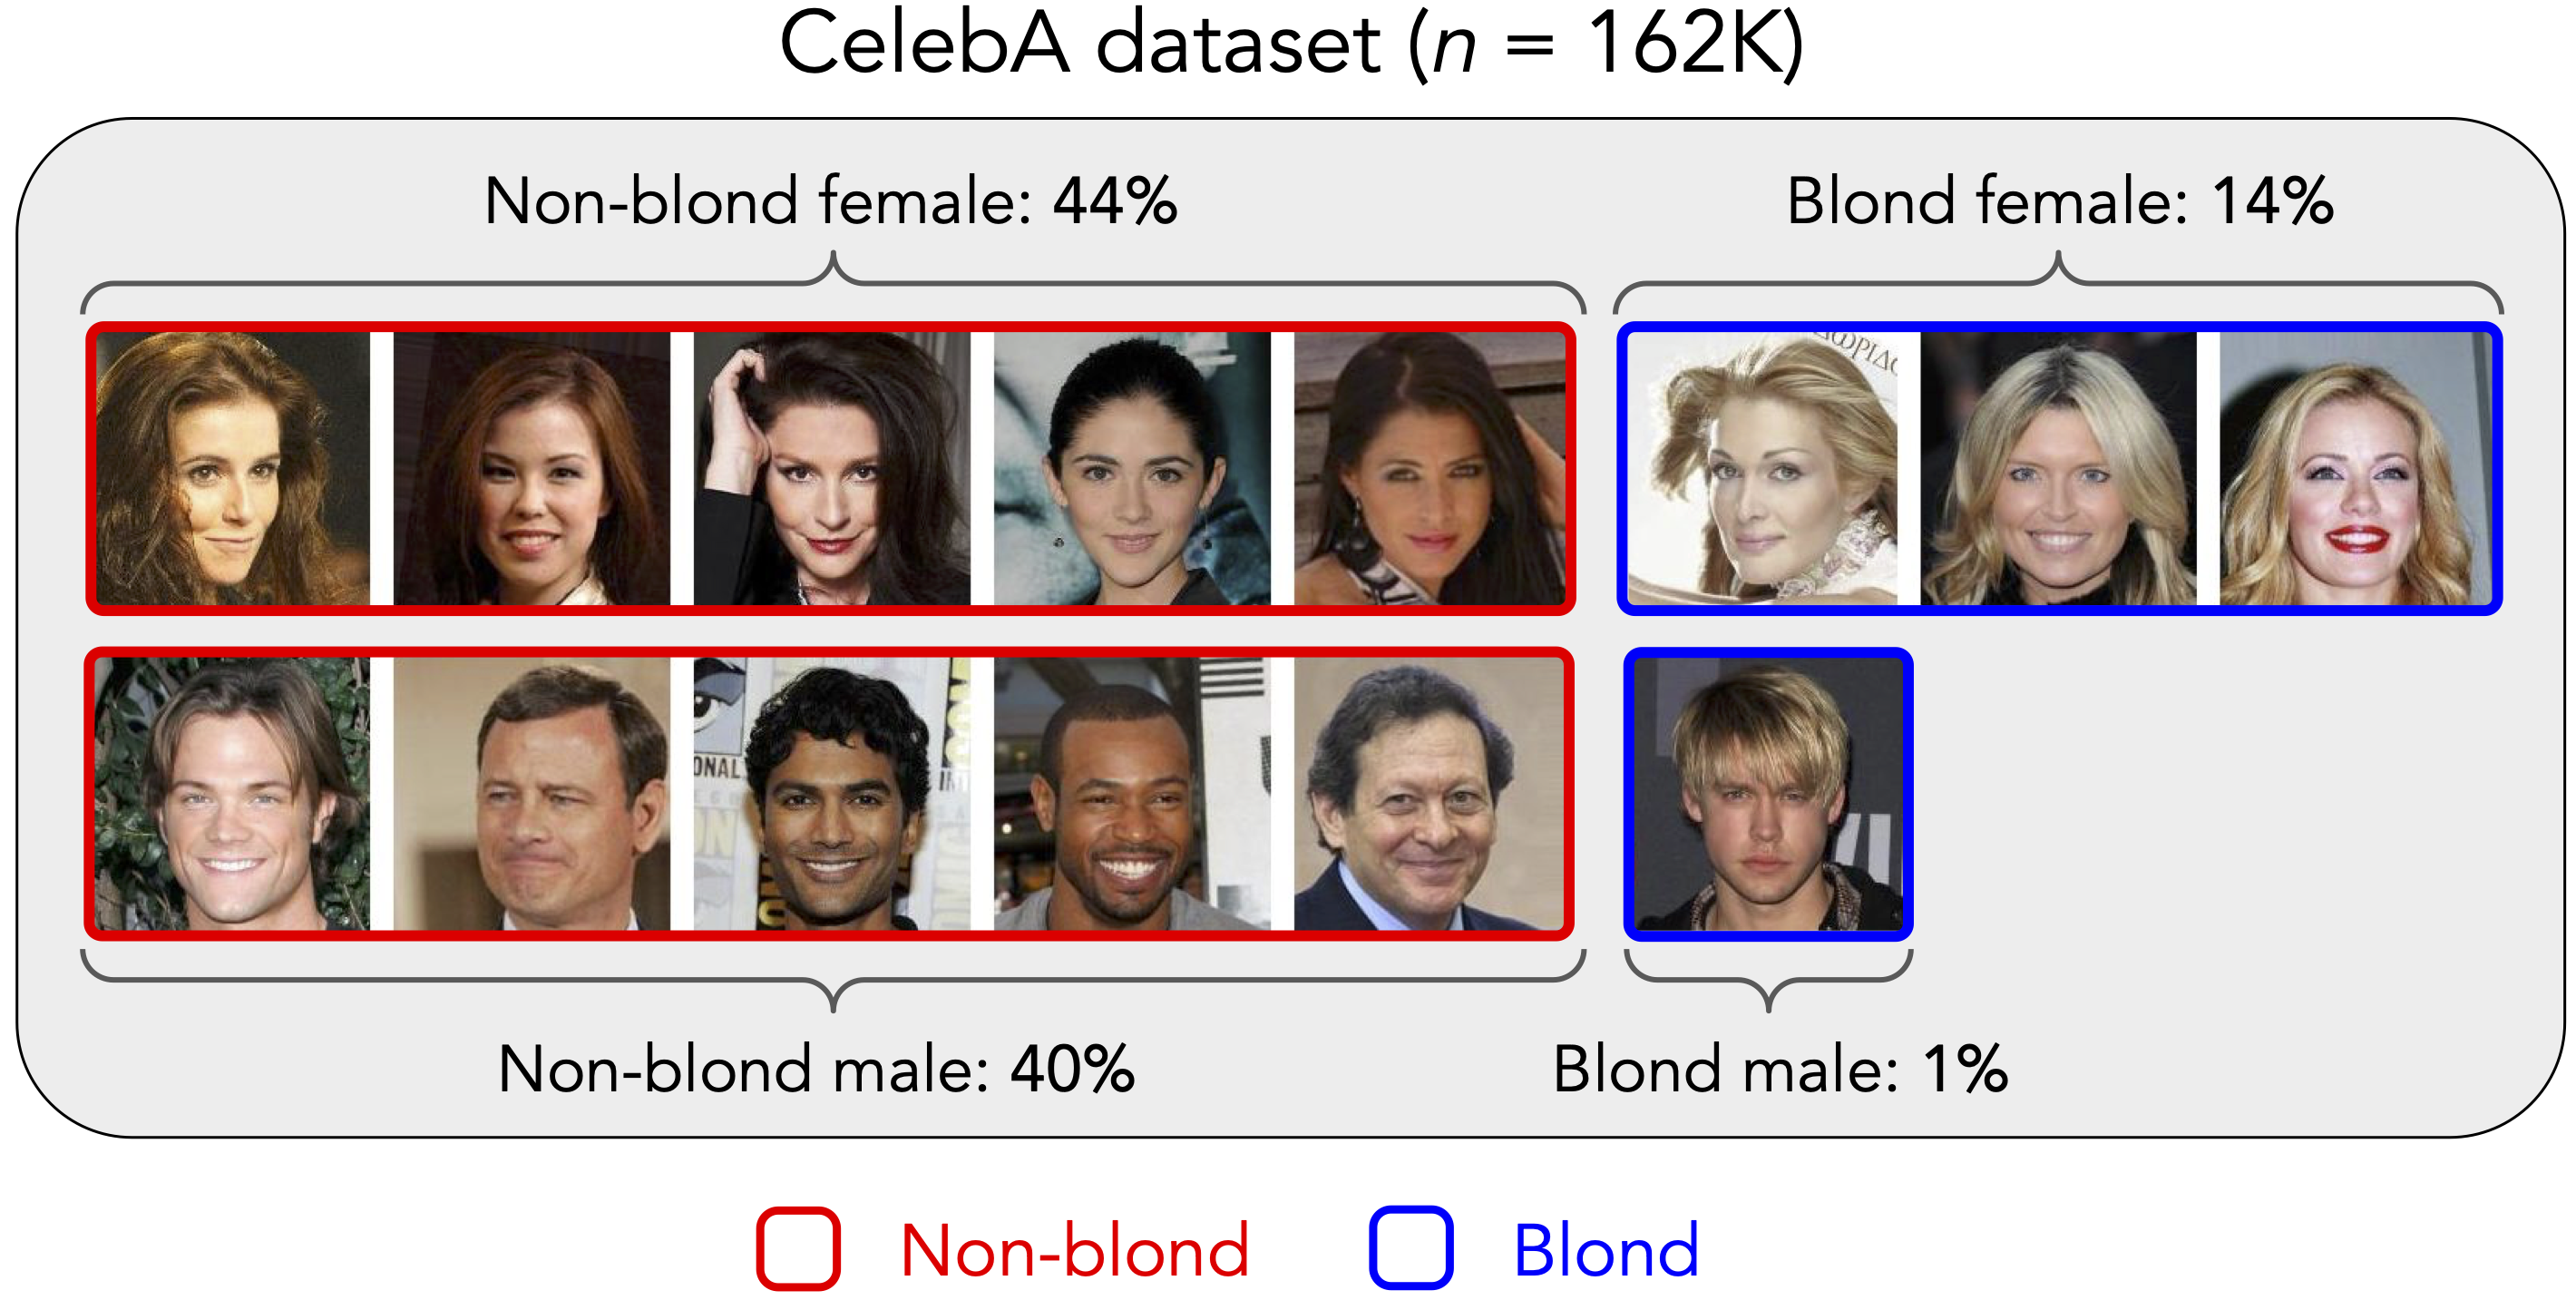 A visualization of CelebA dataset for hair color classification